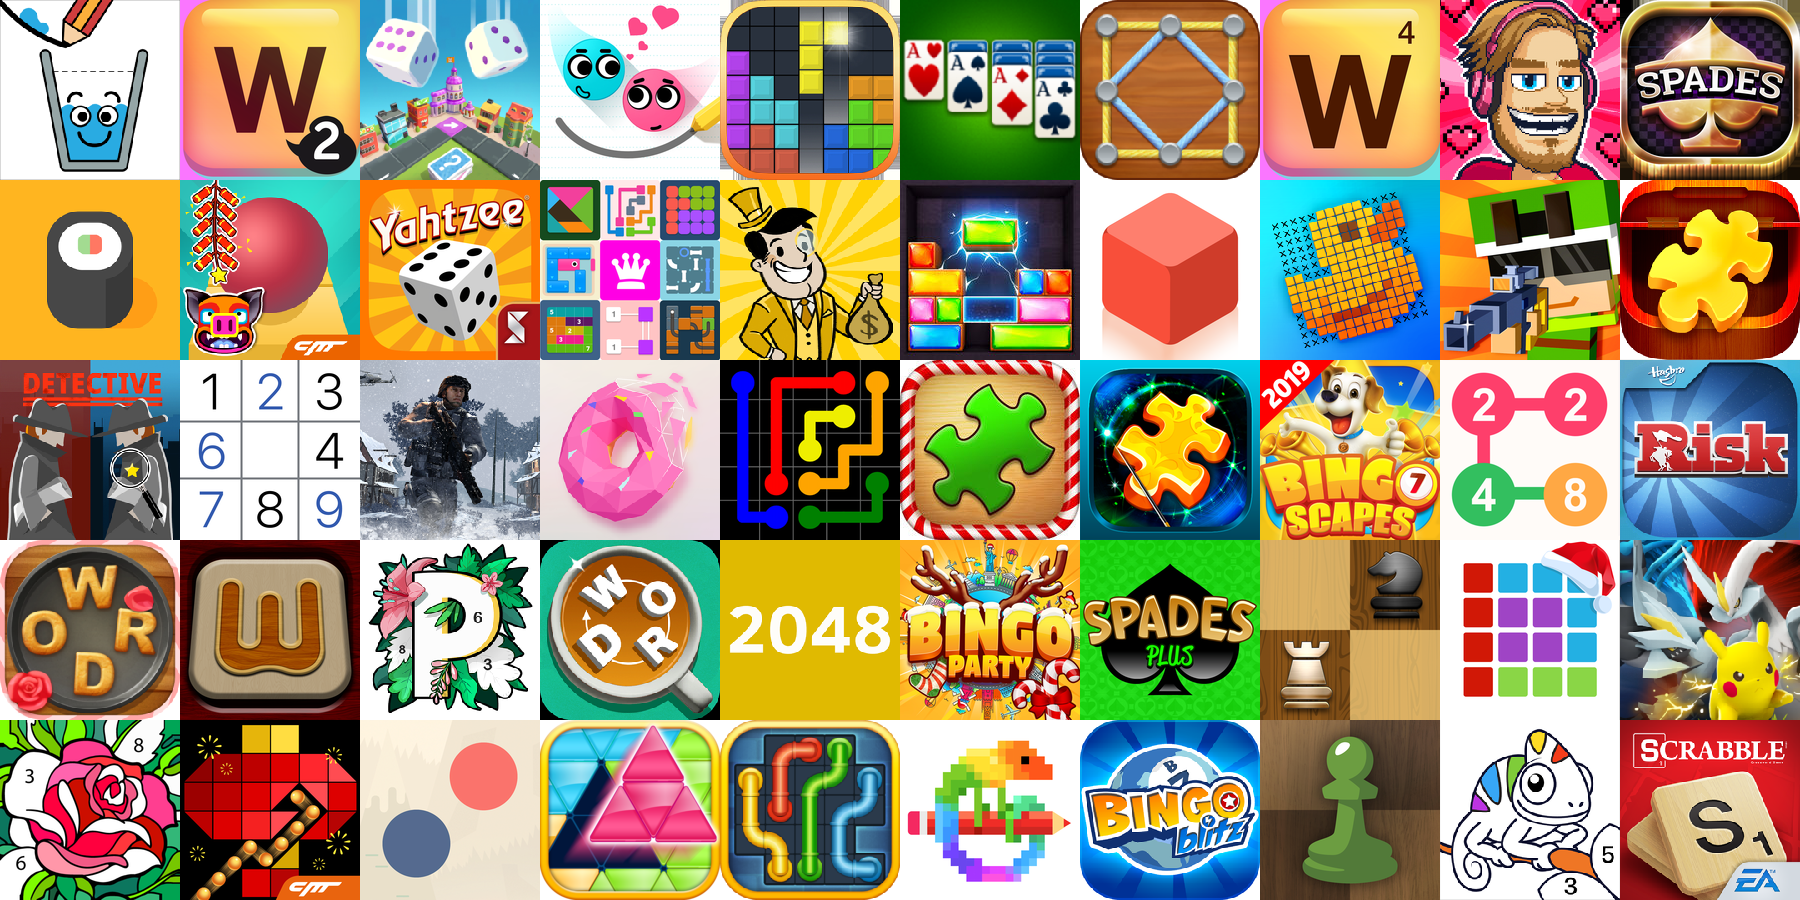 App icons of Top 50 mobile games in the US App Store Game - Board Category 